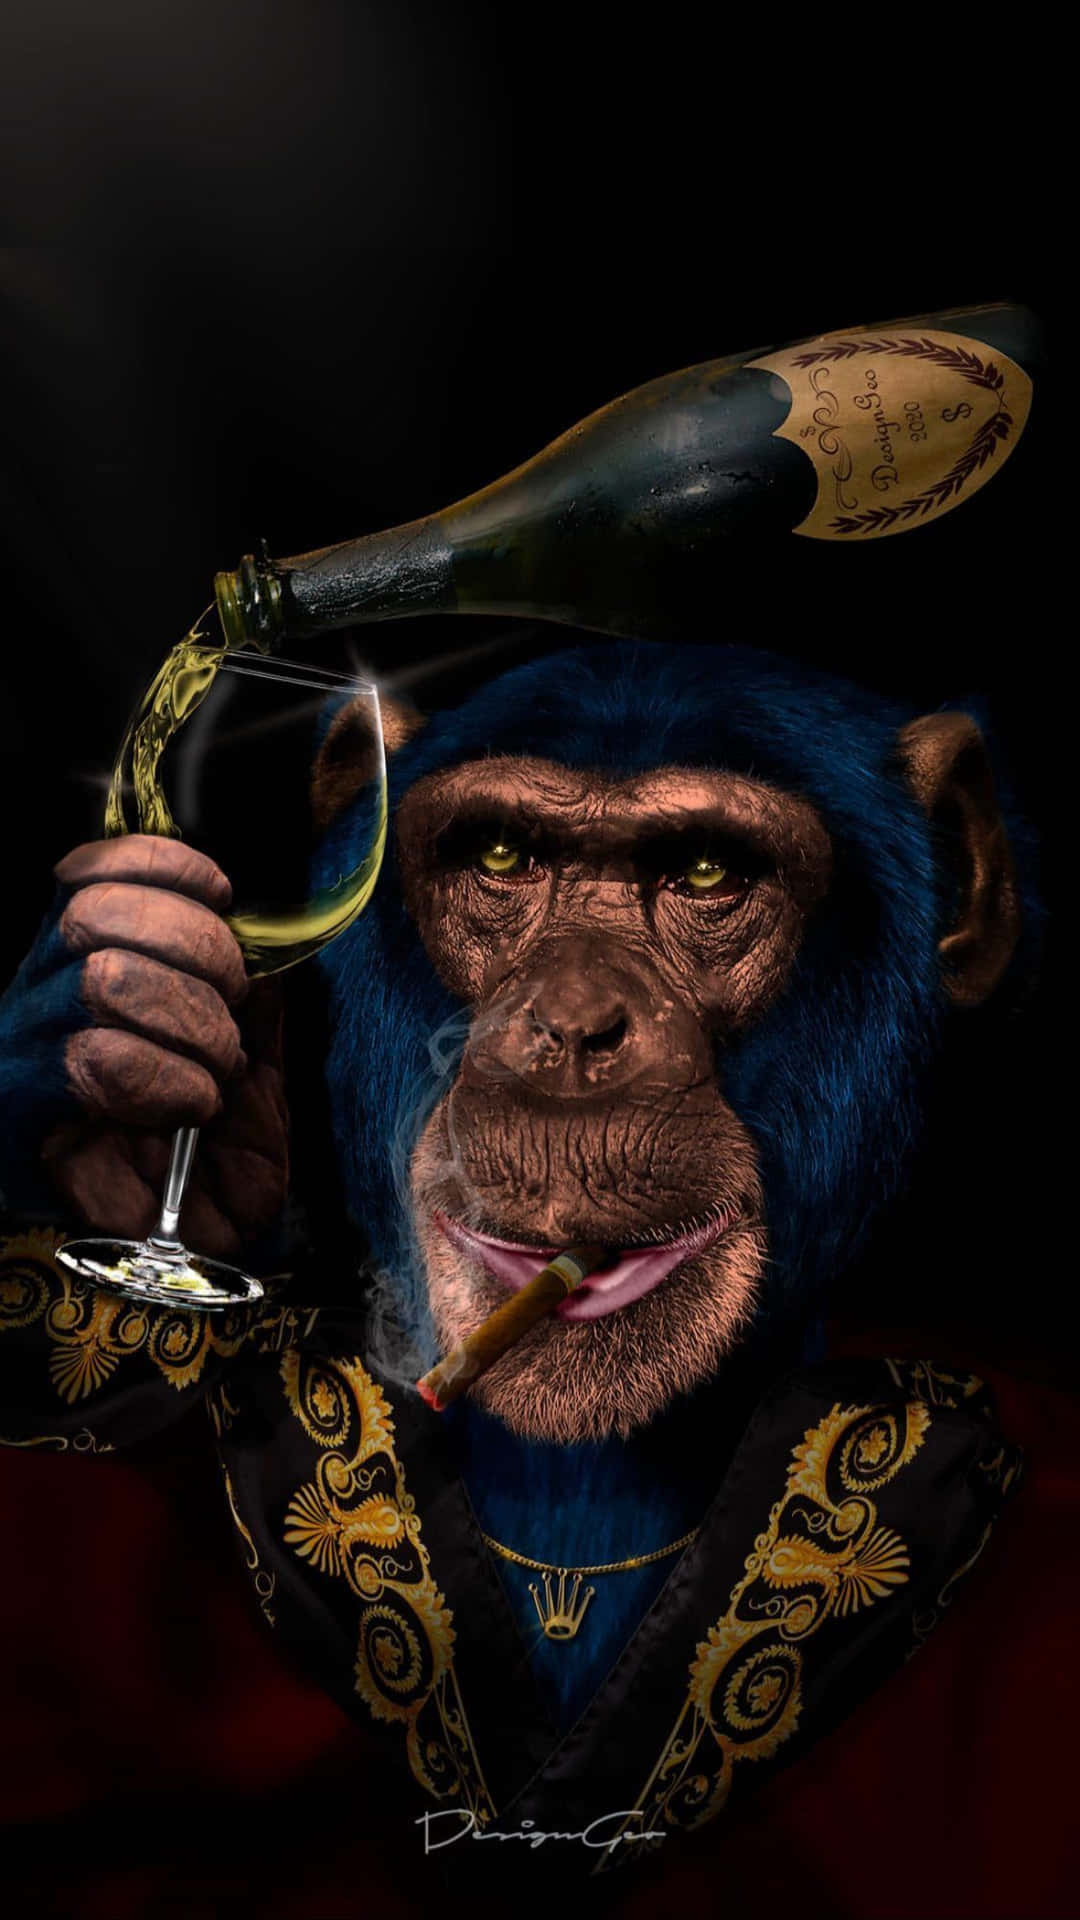 Pick Up Your Next Phone Upgrade - The Monkey iPhone Wallpaper